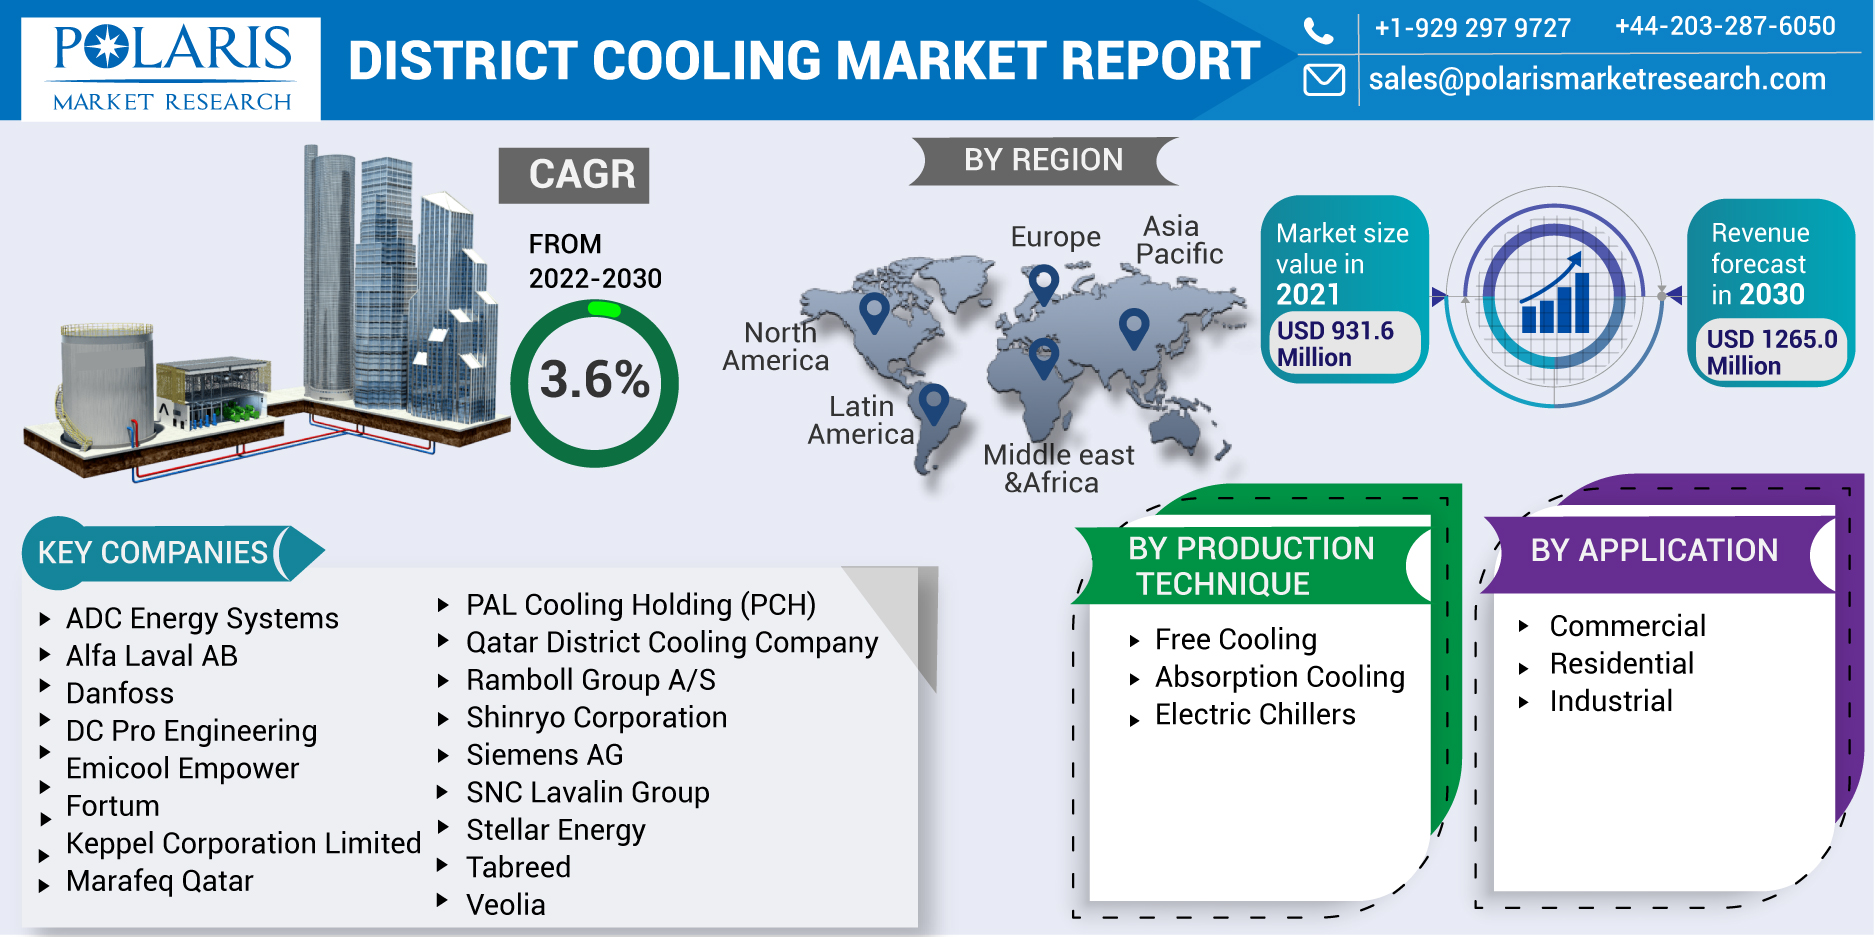 DISTRICT_COOLING_MARKET_REPORT-0122